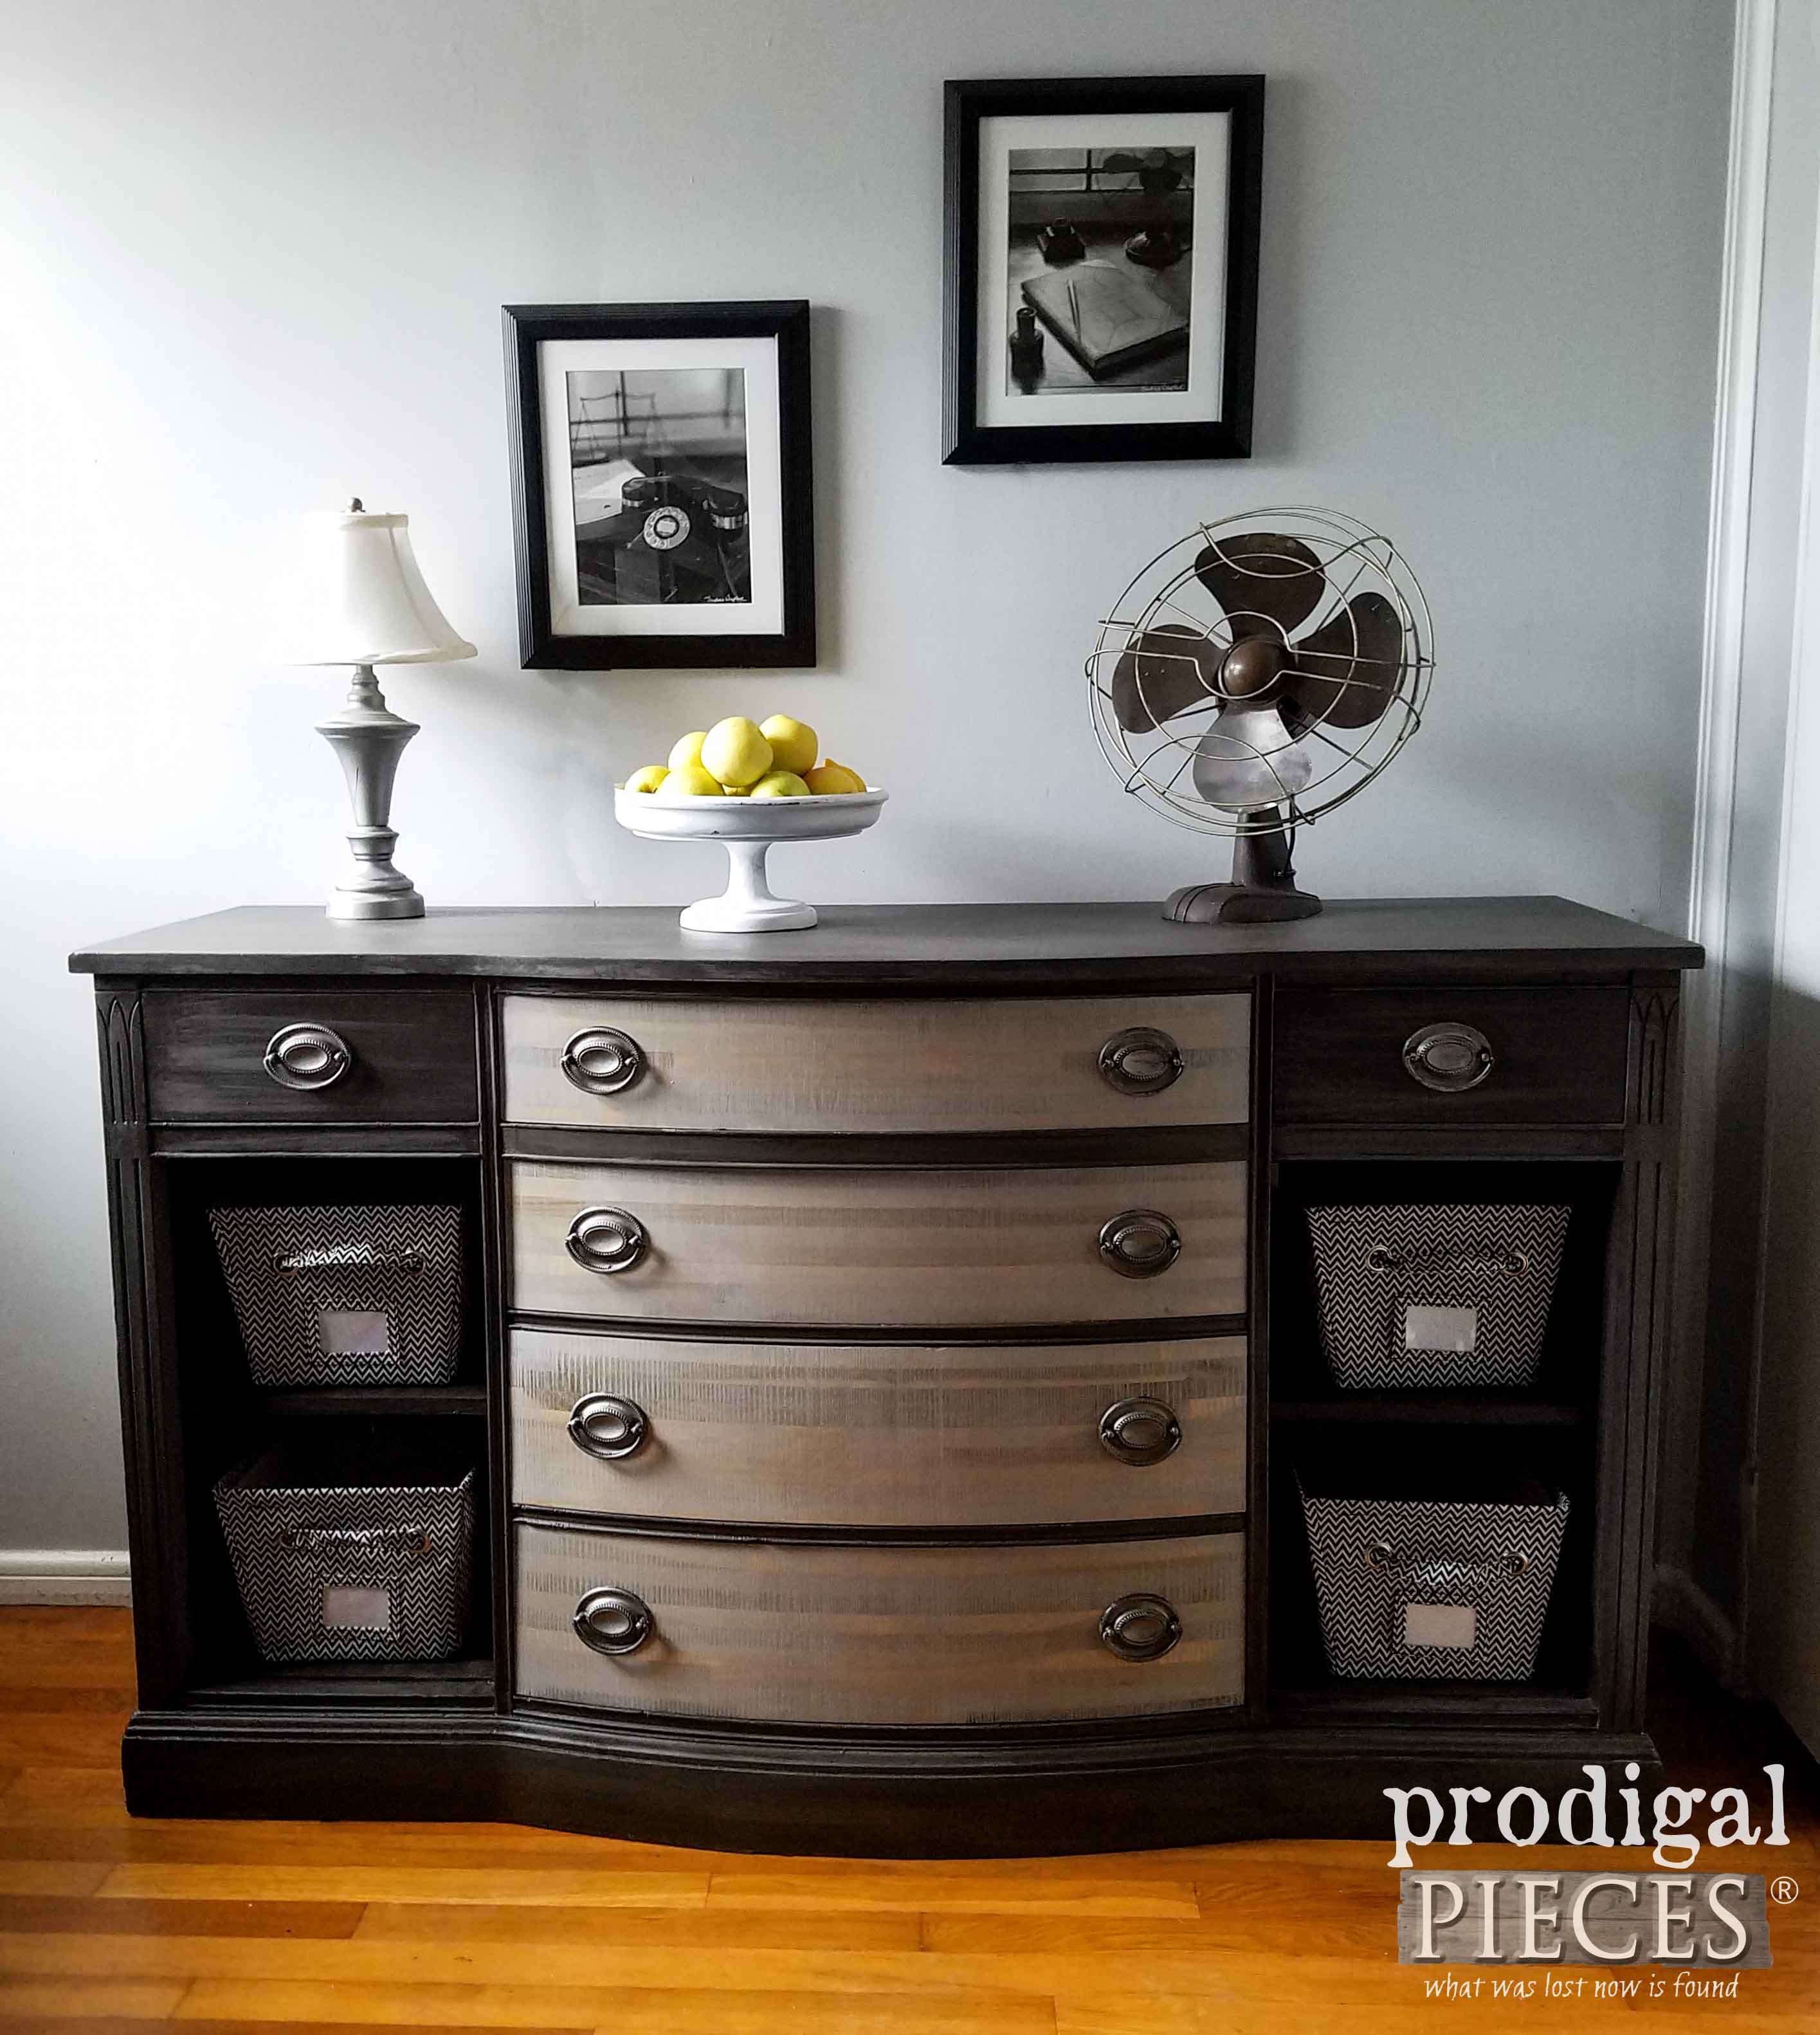 Vintage Buffet Gets Modern Chic Makeover by Teenage Boy | Prodigal Pieces | prodigalpieces.com